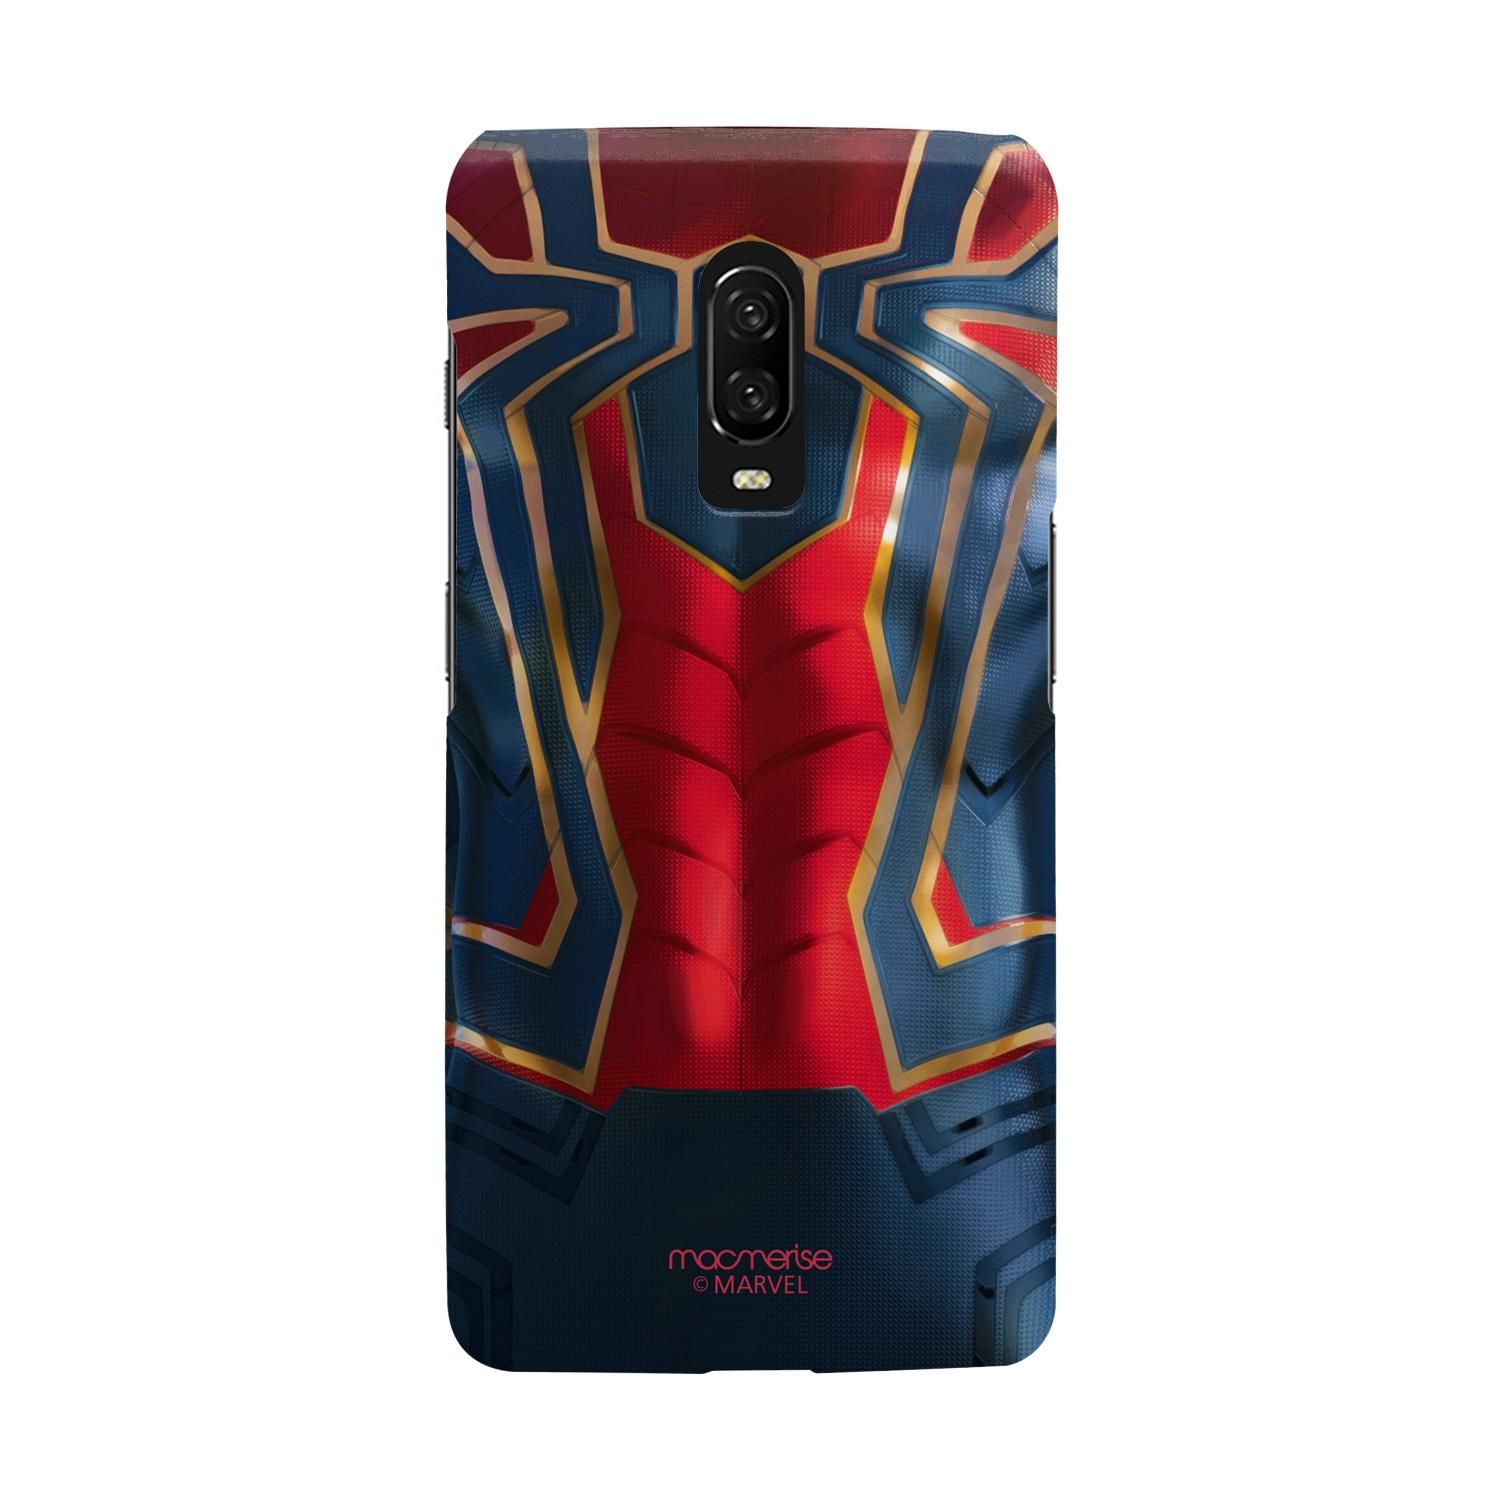 Spiderman Suit - Sublime case for OnePlus 6T